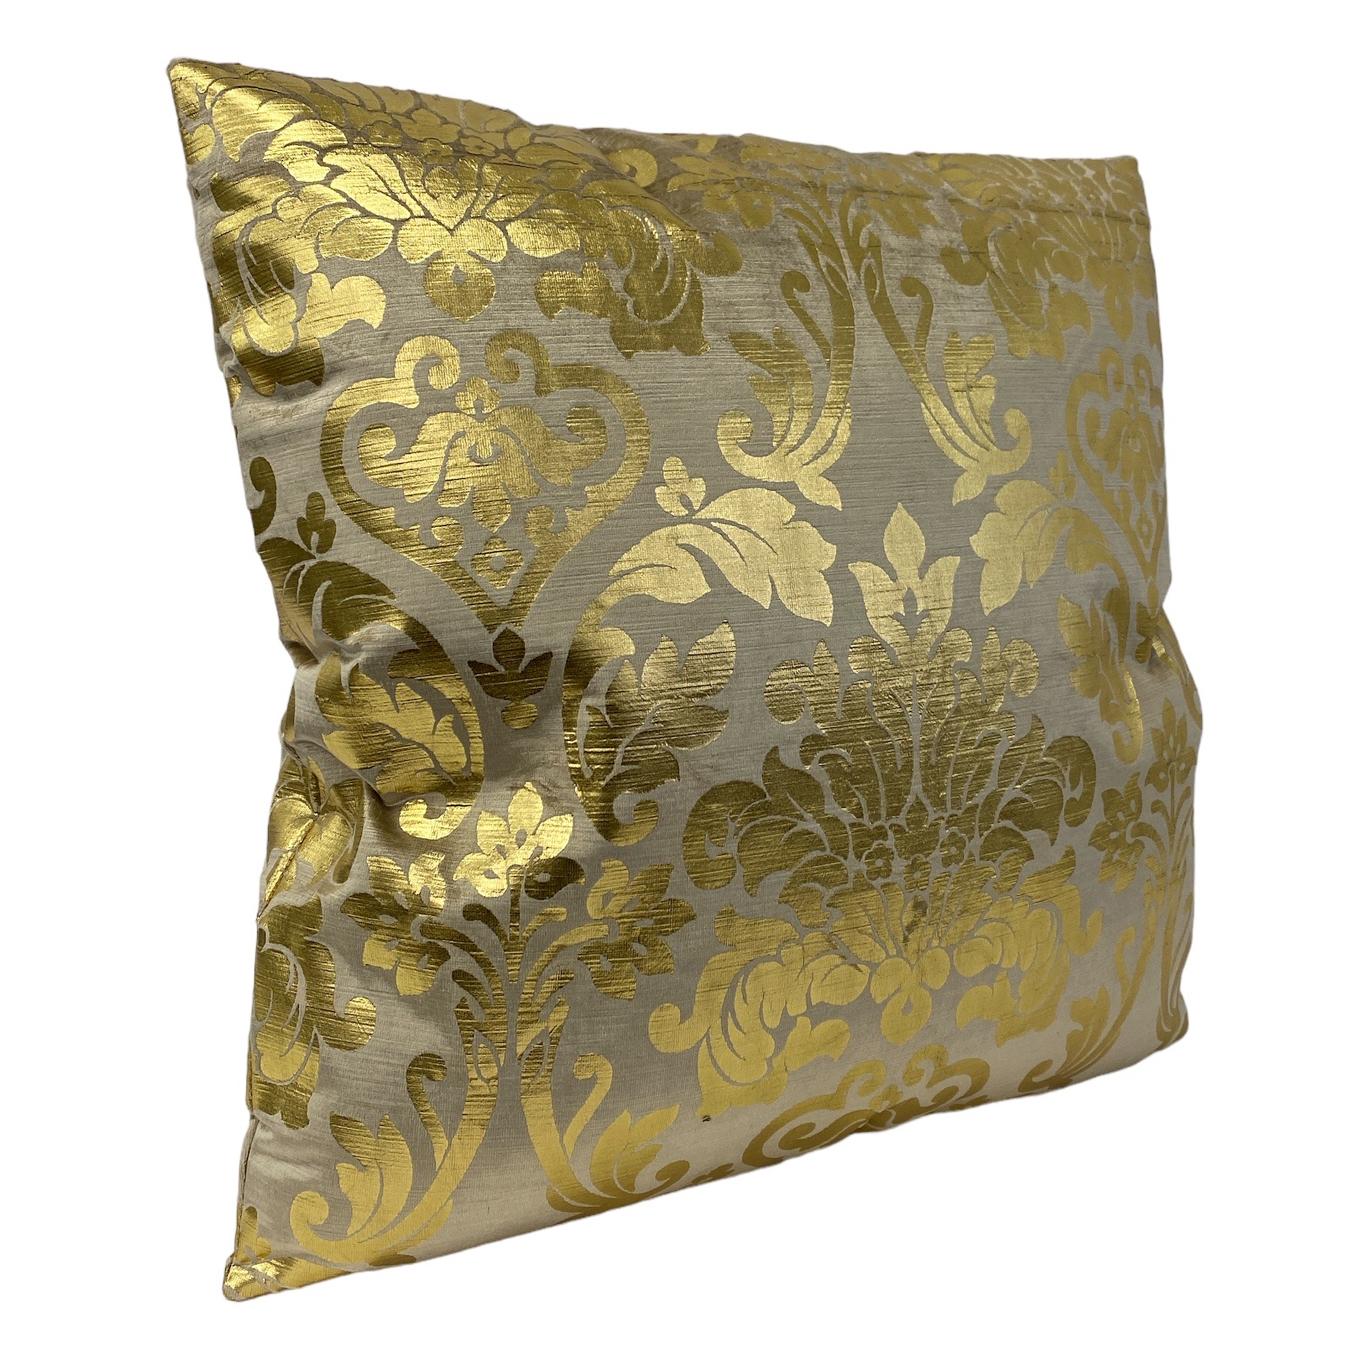 Exuberant arabesques of shimmering metallic gold seem to float above a cloud of smoky [velvet/suede].  Ethereal opulence. Makeover your couch with our plush and glamorous Yellow Gold Metallic  Velvet Pillow! Accented with a gold  print, this velvet